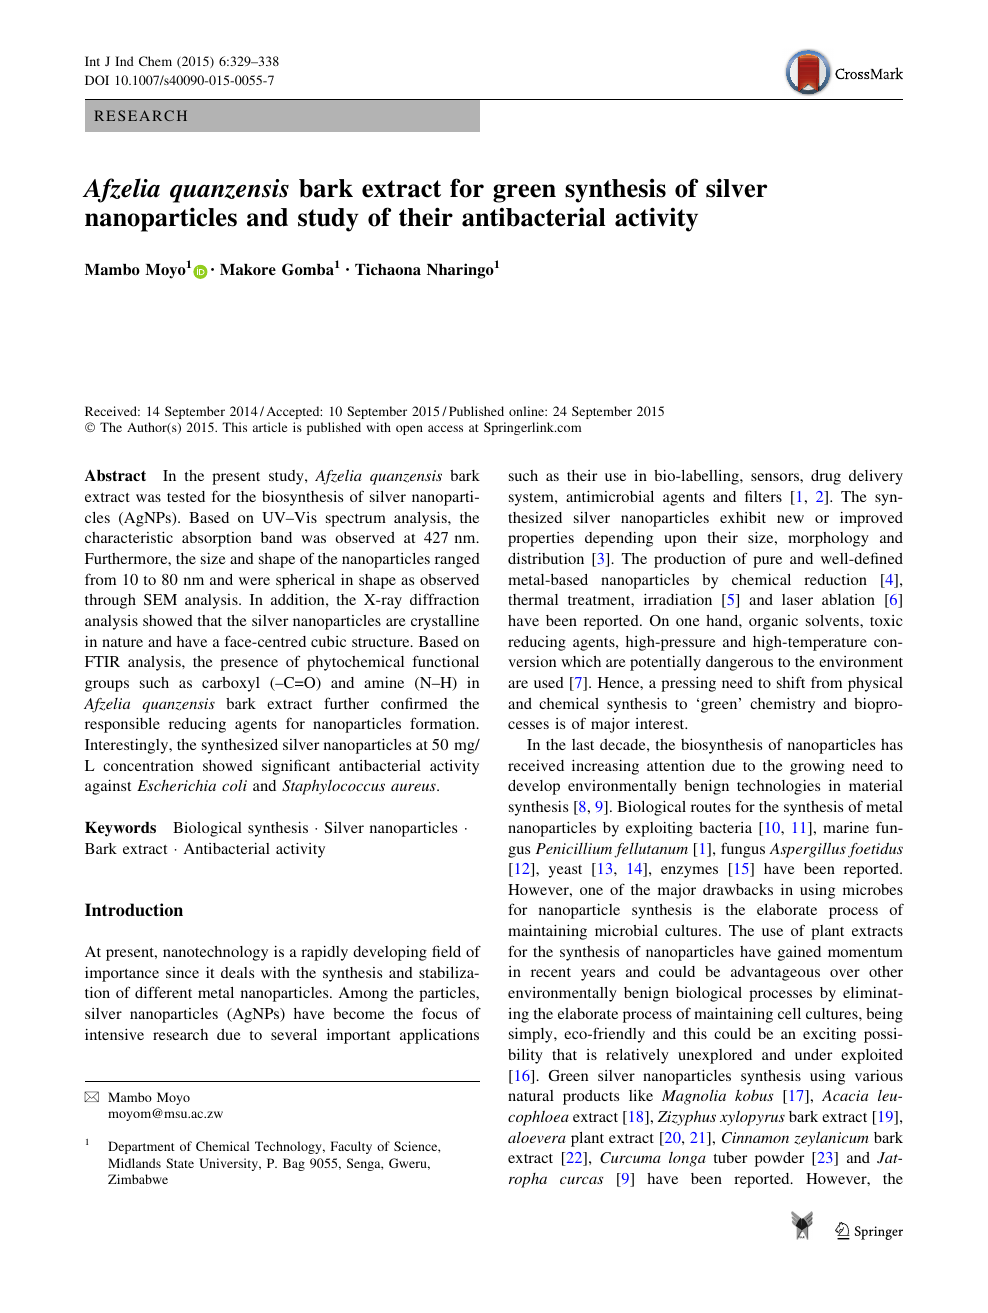 Afzelia Quanzensis Bark Extract For Green Synthesis Of Silver Nanoparticles And Study Of Their Antibacterial Activity Topic Of Research Paper In Nano Technology Download Scholarly Article Pdf And Read For Free On